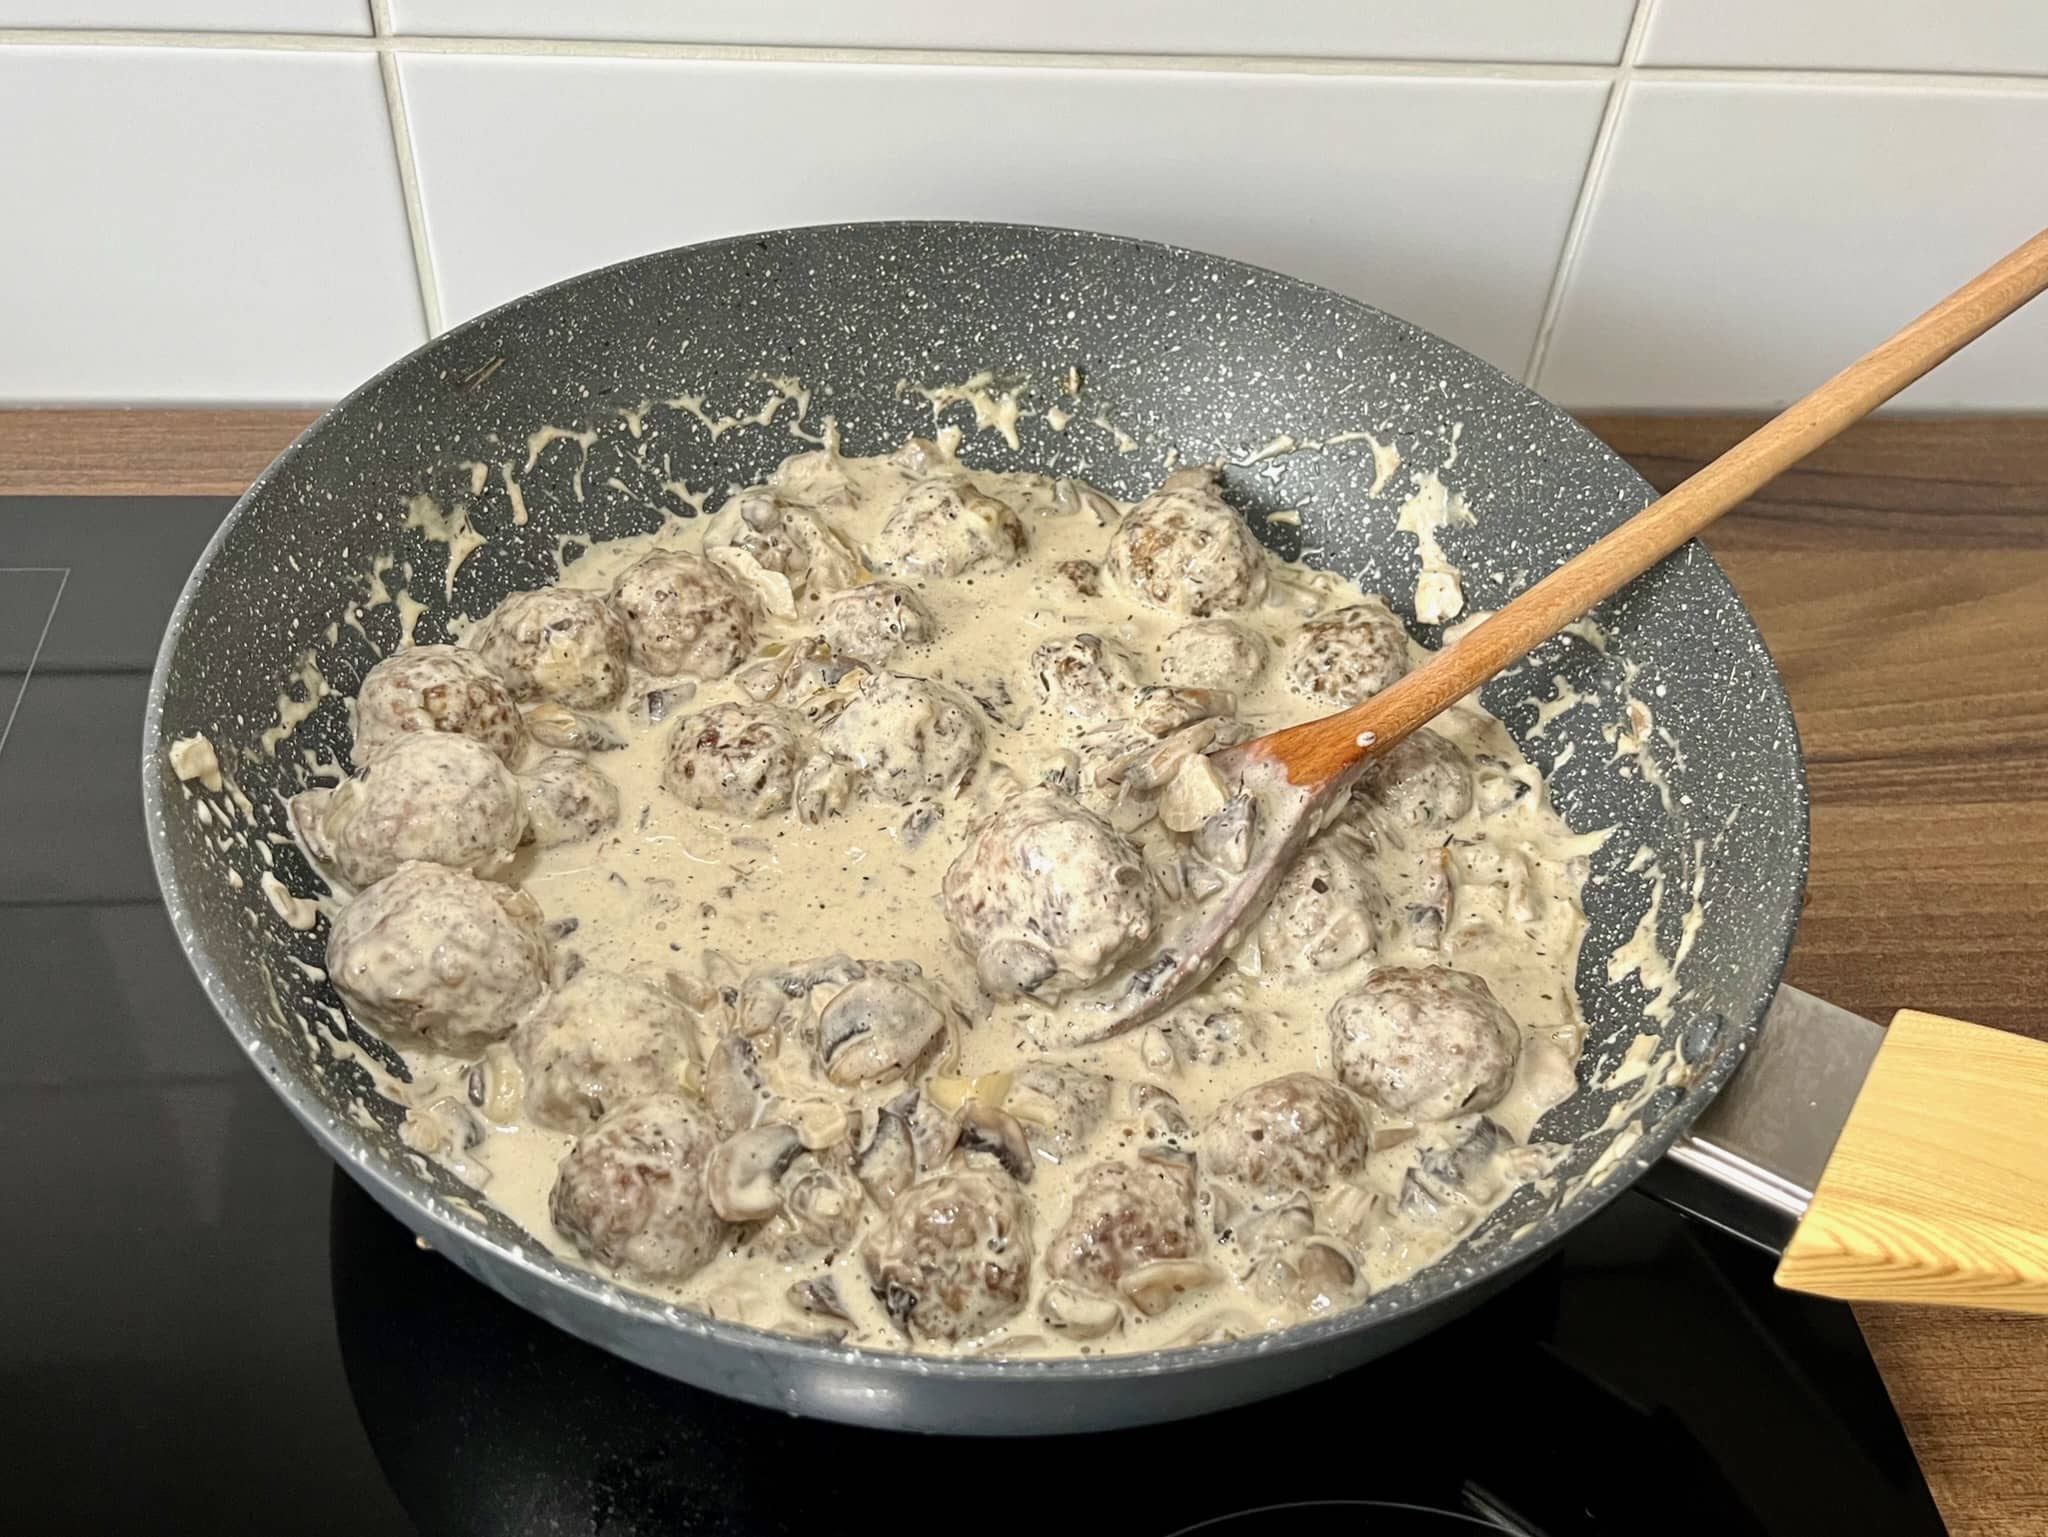 Meatballs added to sauce